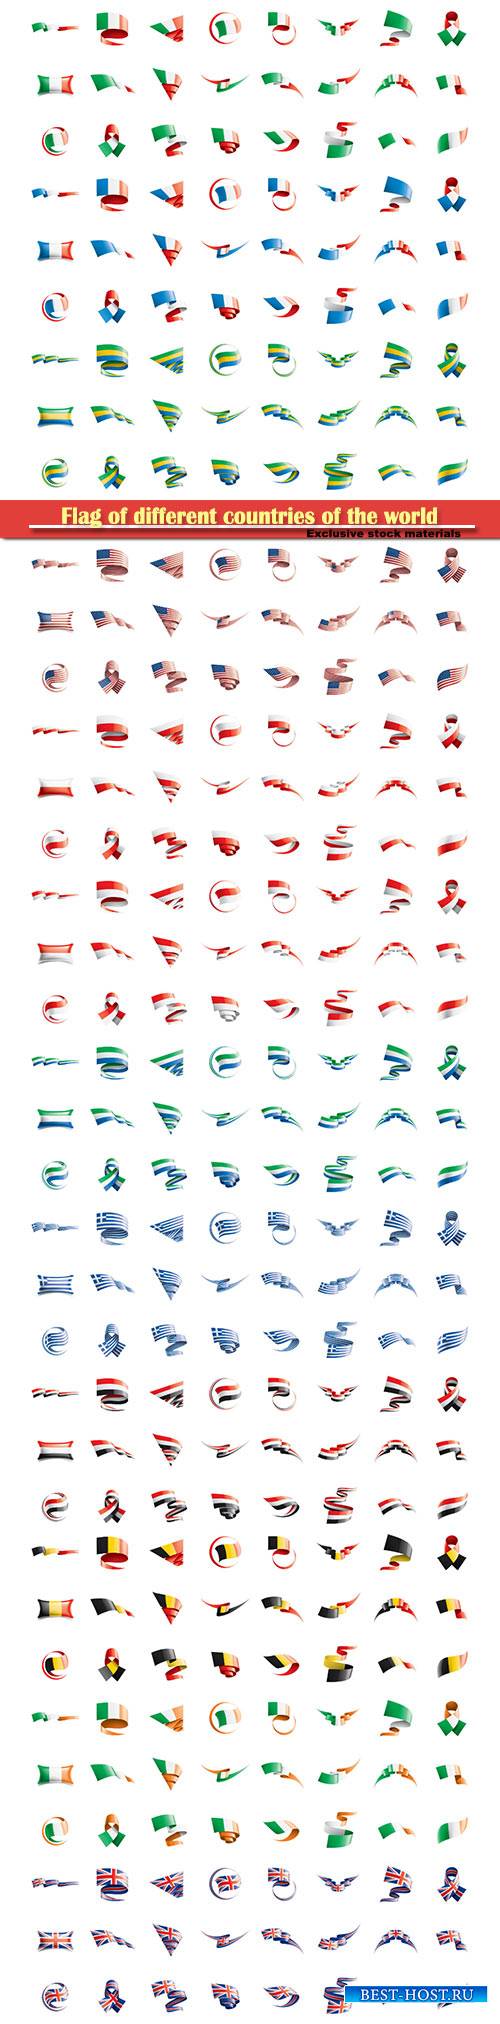 Flag of different countries of the world, vector illustration on a white ba ...